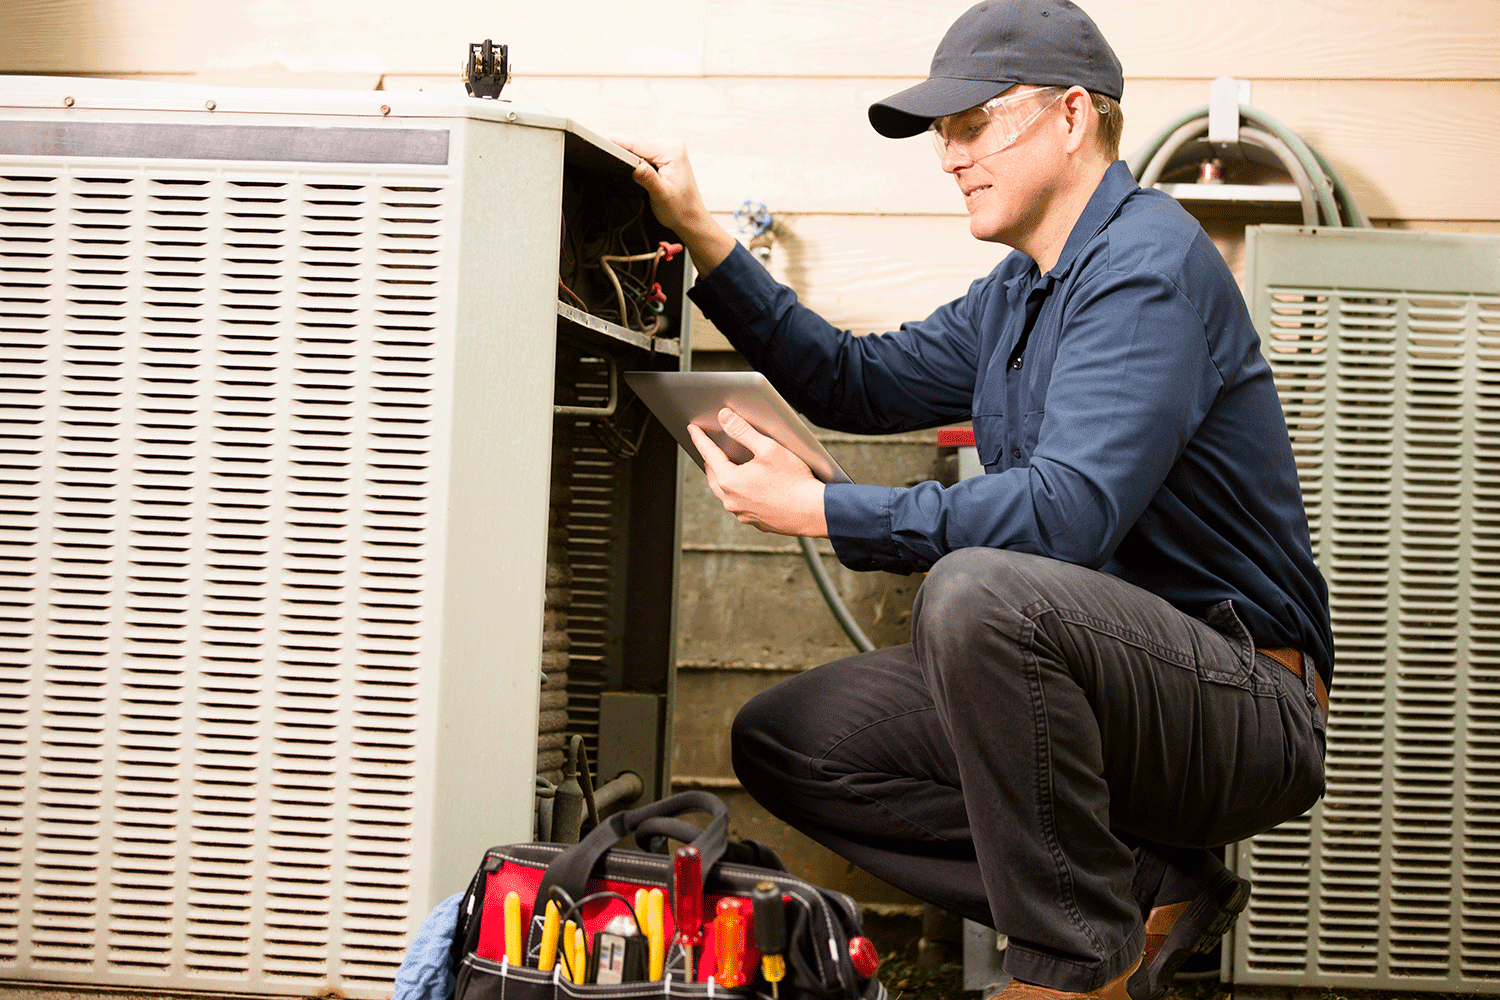 https://www.istockphoto.com/photo/air-conditioner-repairman-works-on-home-unit-blue-collar-worker-gm489211146-74593865